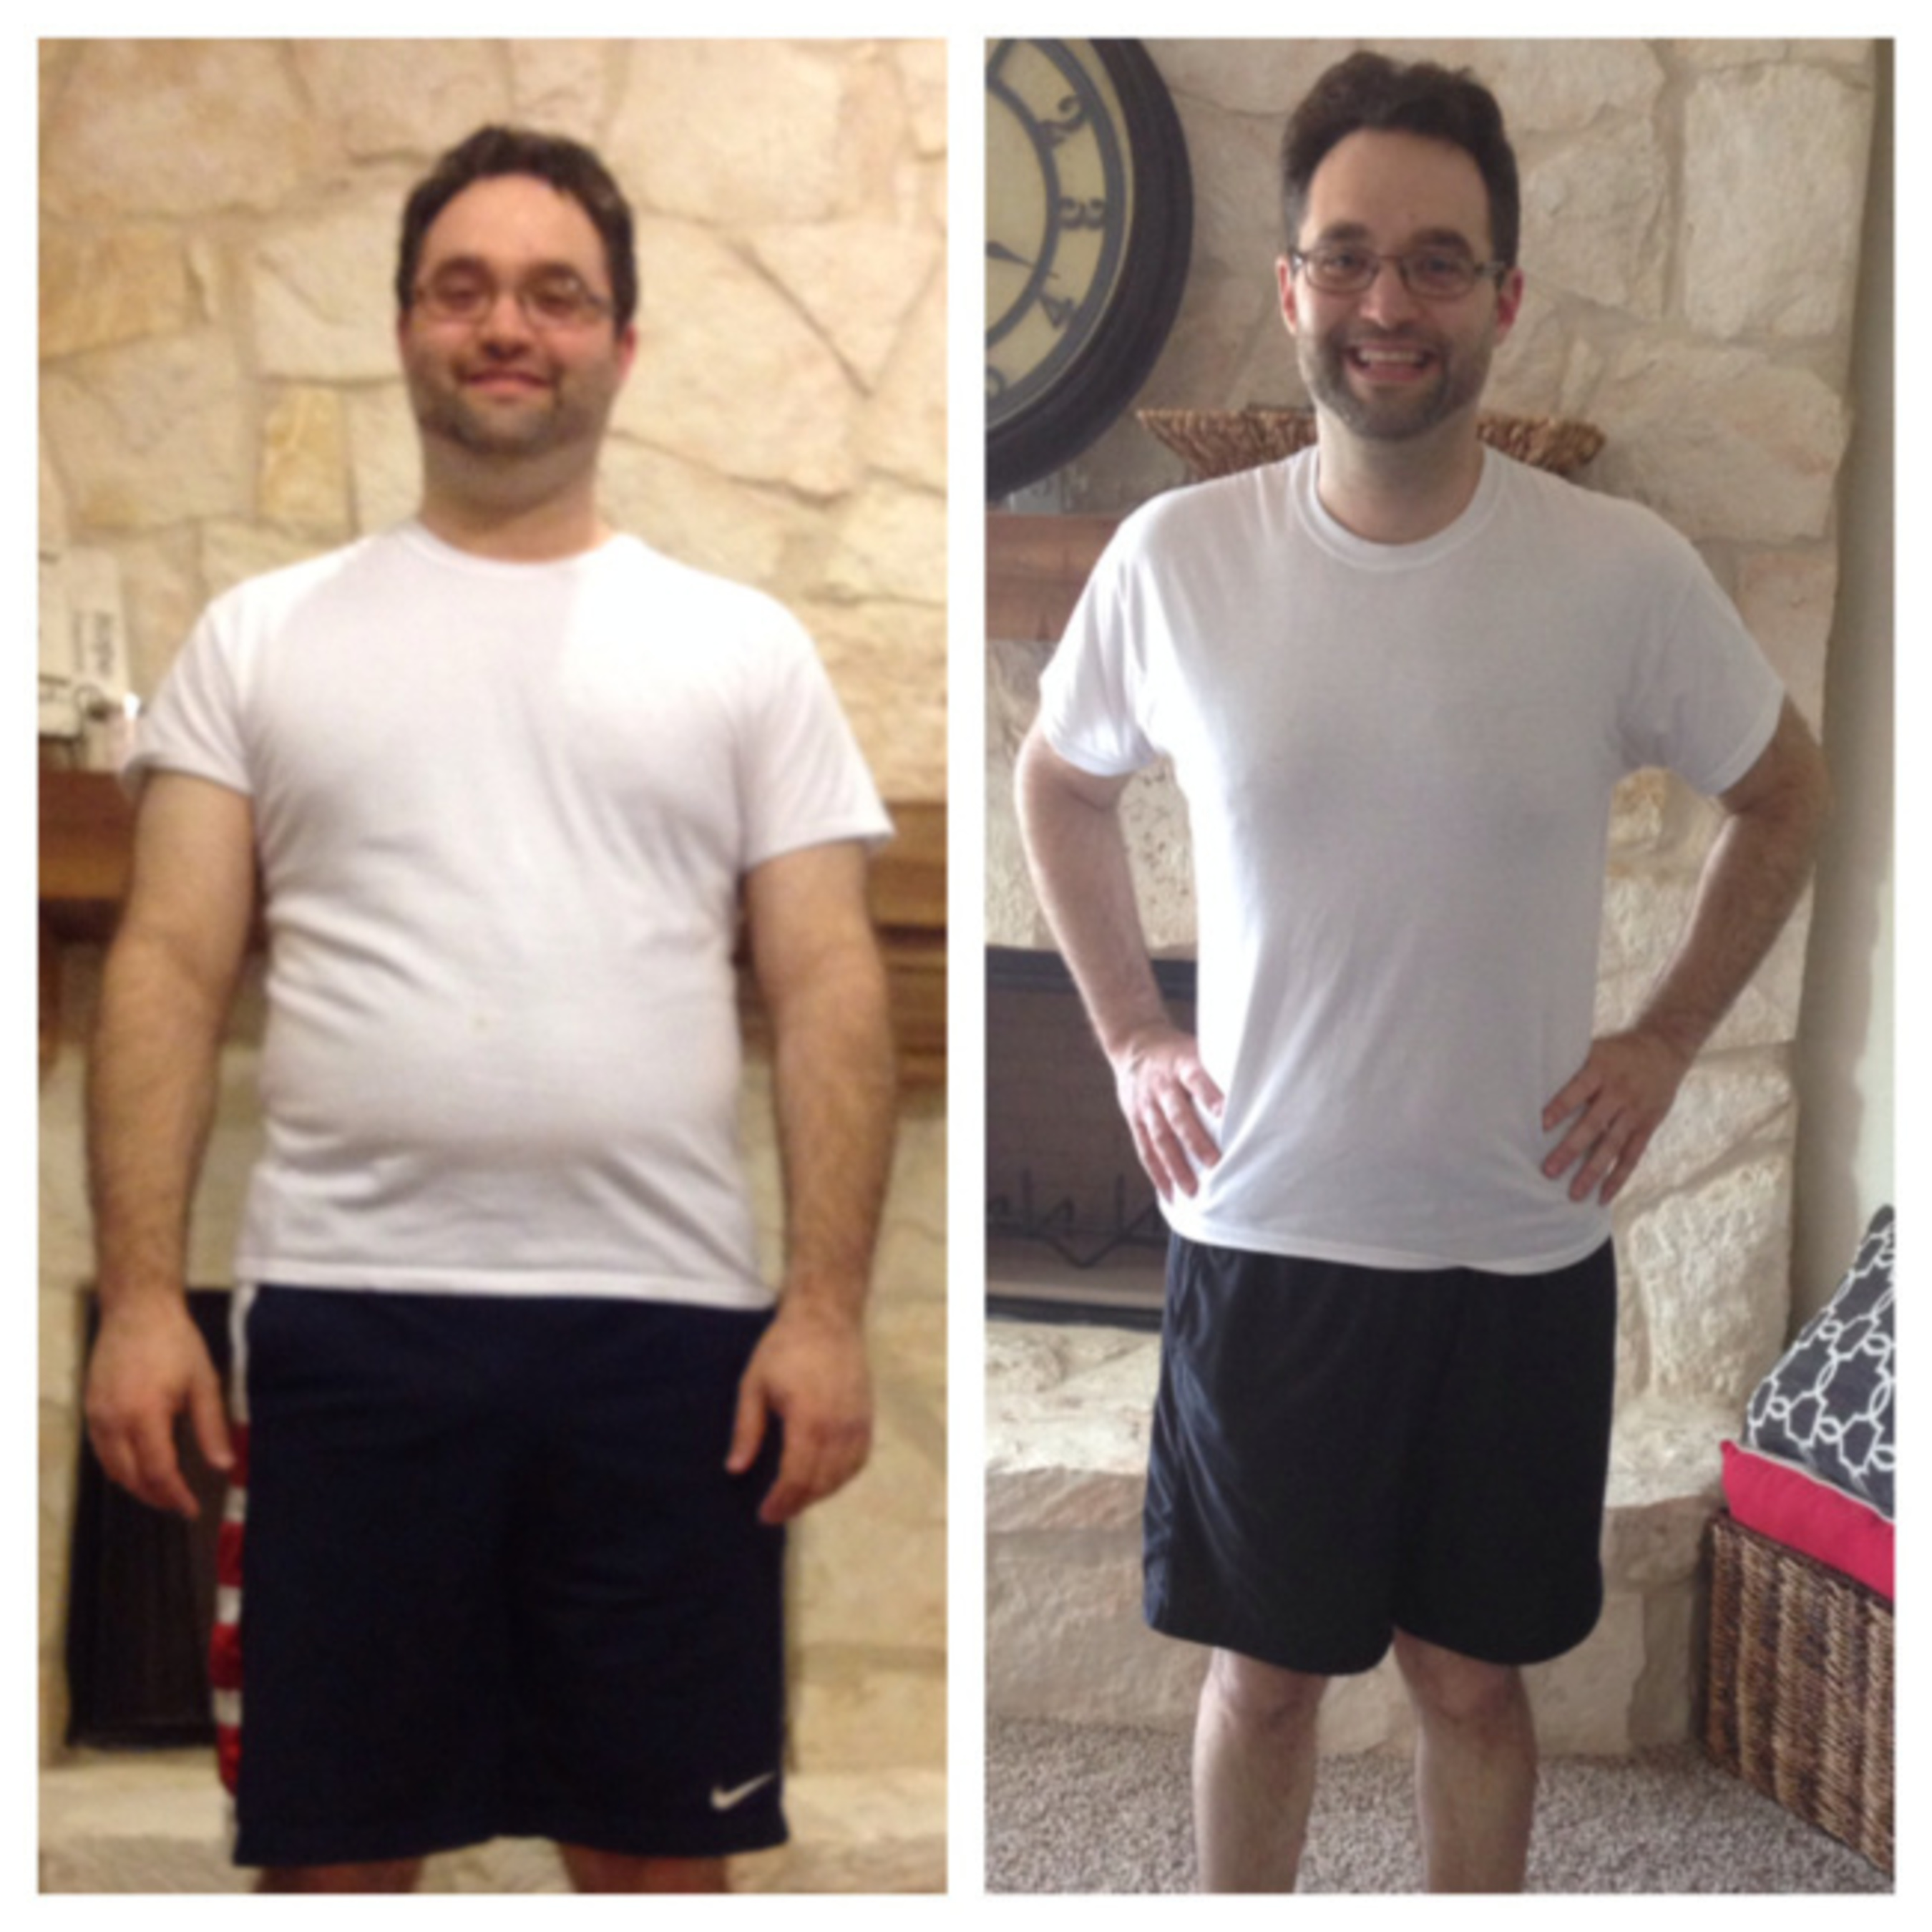 Before and After of Health Kwest Winner 2014 Blake Millier, who lost 76 lbs with Genghis Grill (PRNewsFoto/Genghis Grill)